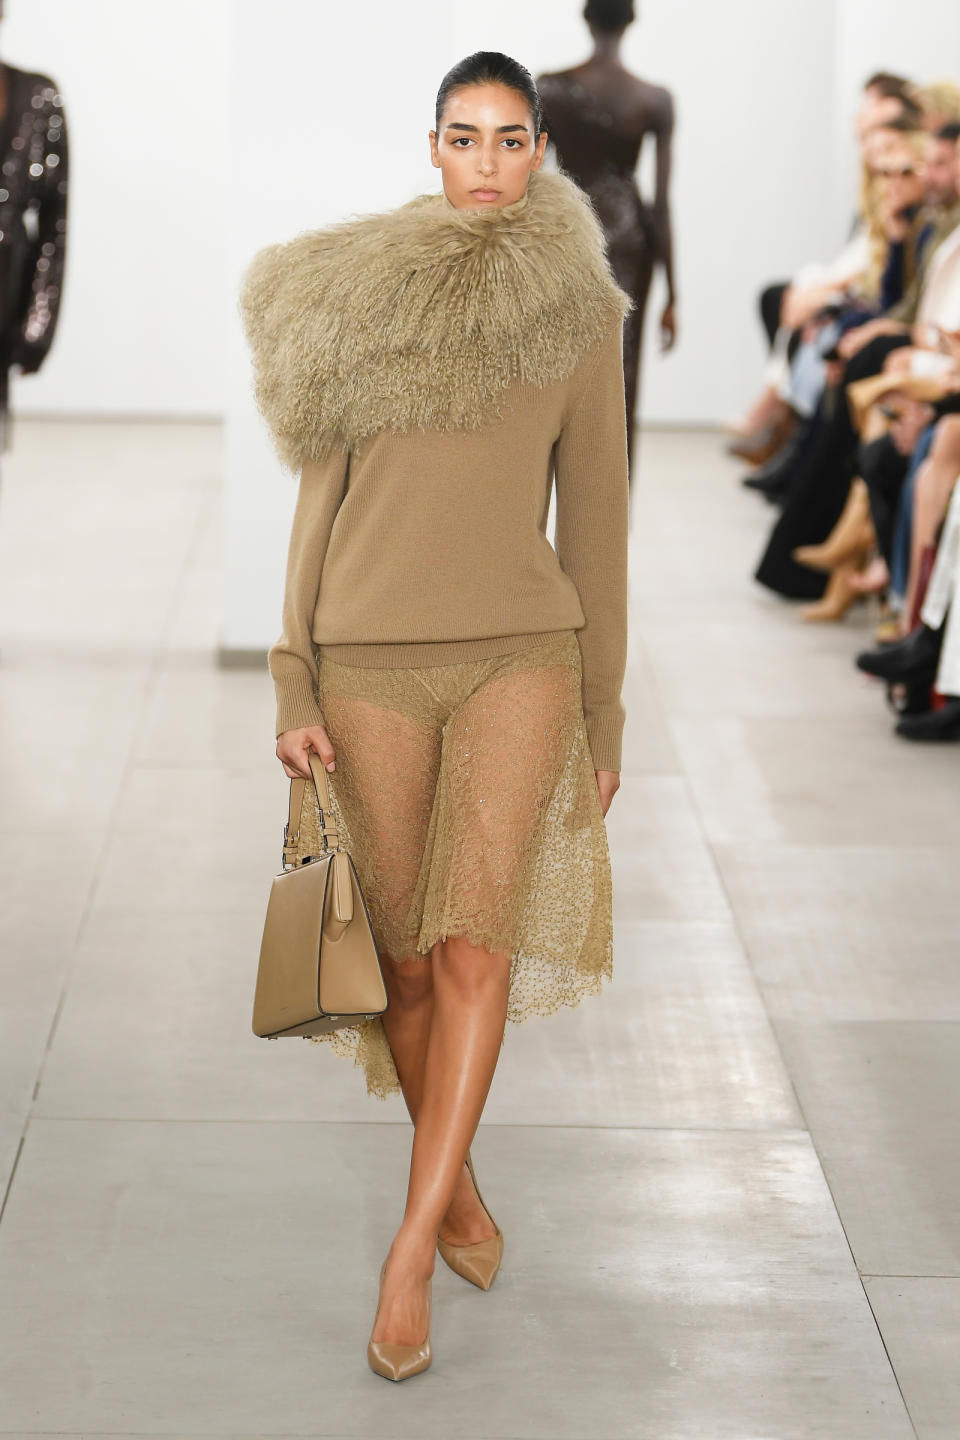 Michael Kors fall 2024 ready-to-wear collection at New York Fashion Week